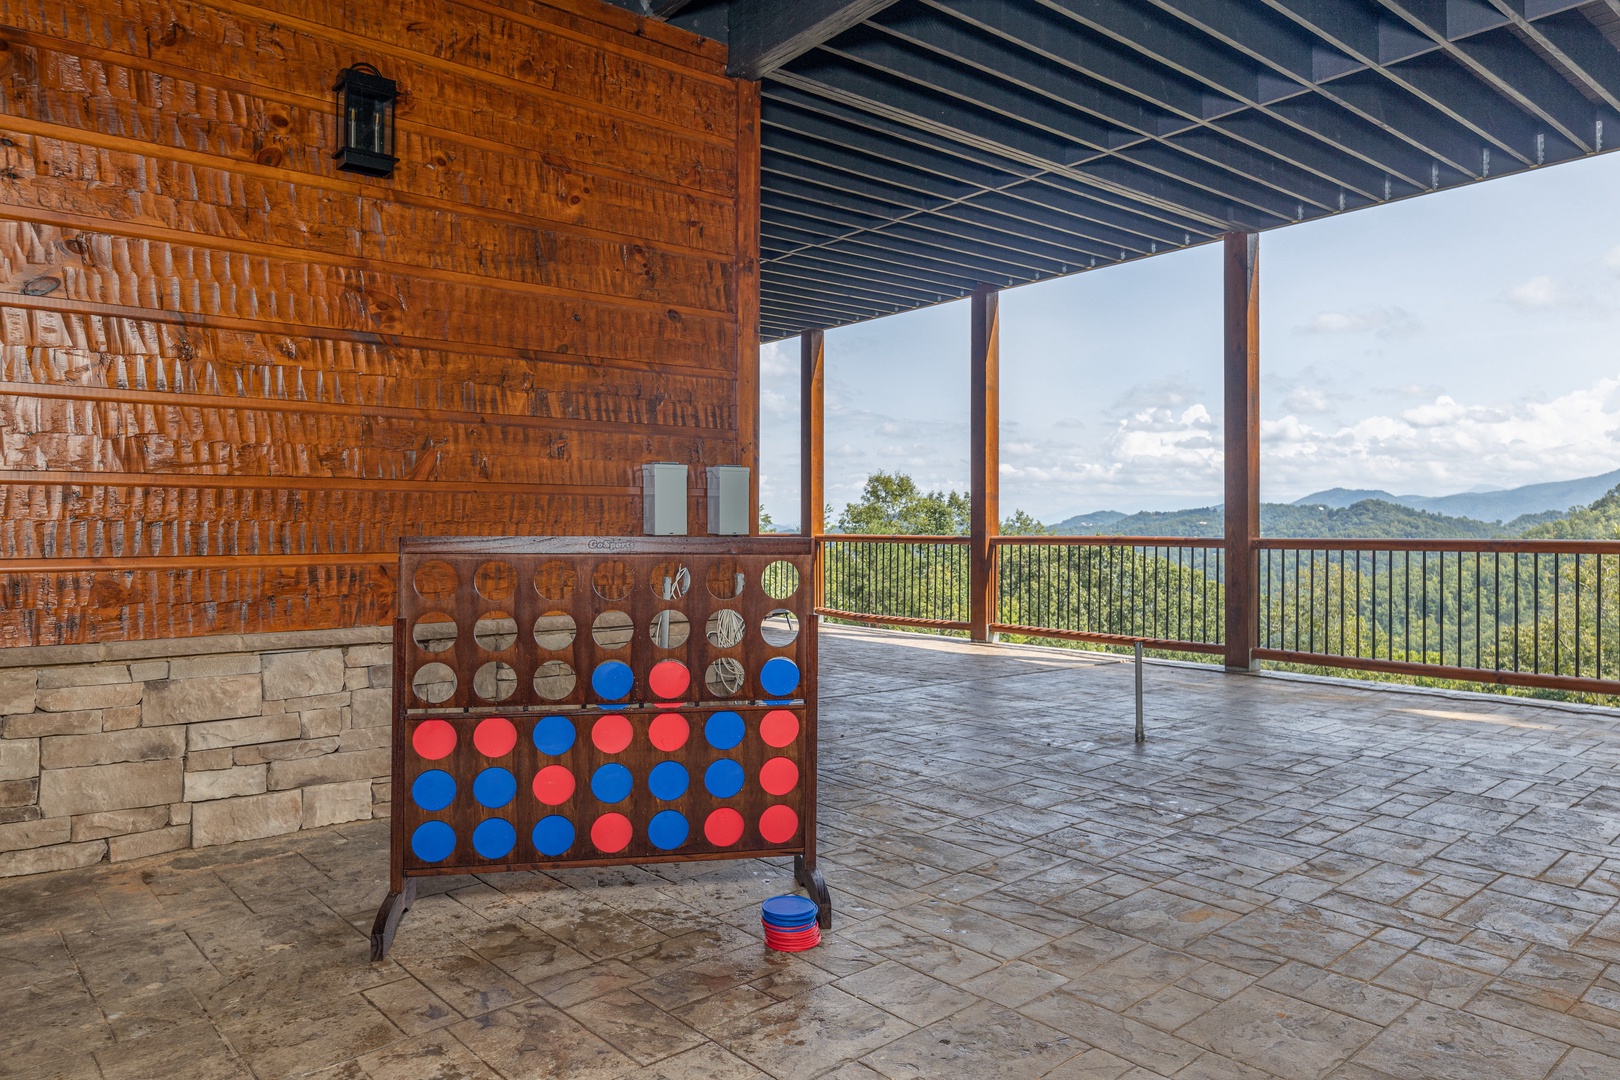 Large outdoor connect four game at Black Bears & Biscuits Lodge, a 6 bedroom cabin rental located in Pigeon Forge